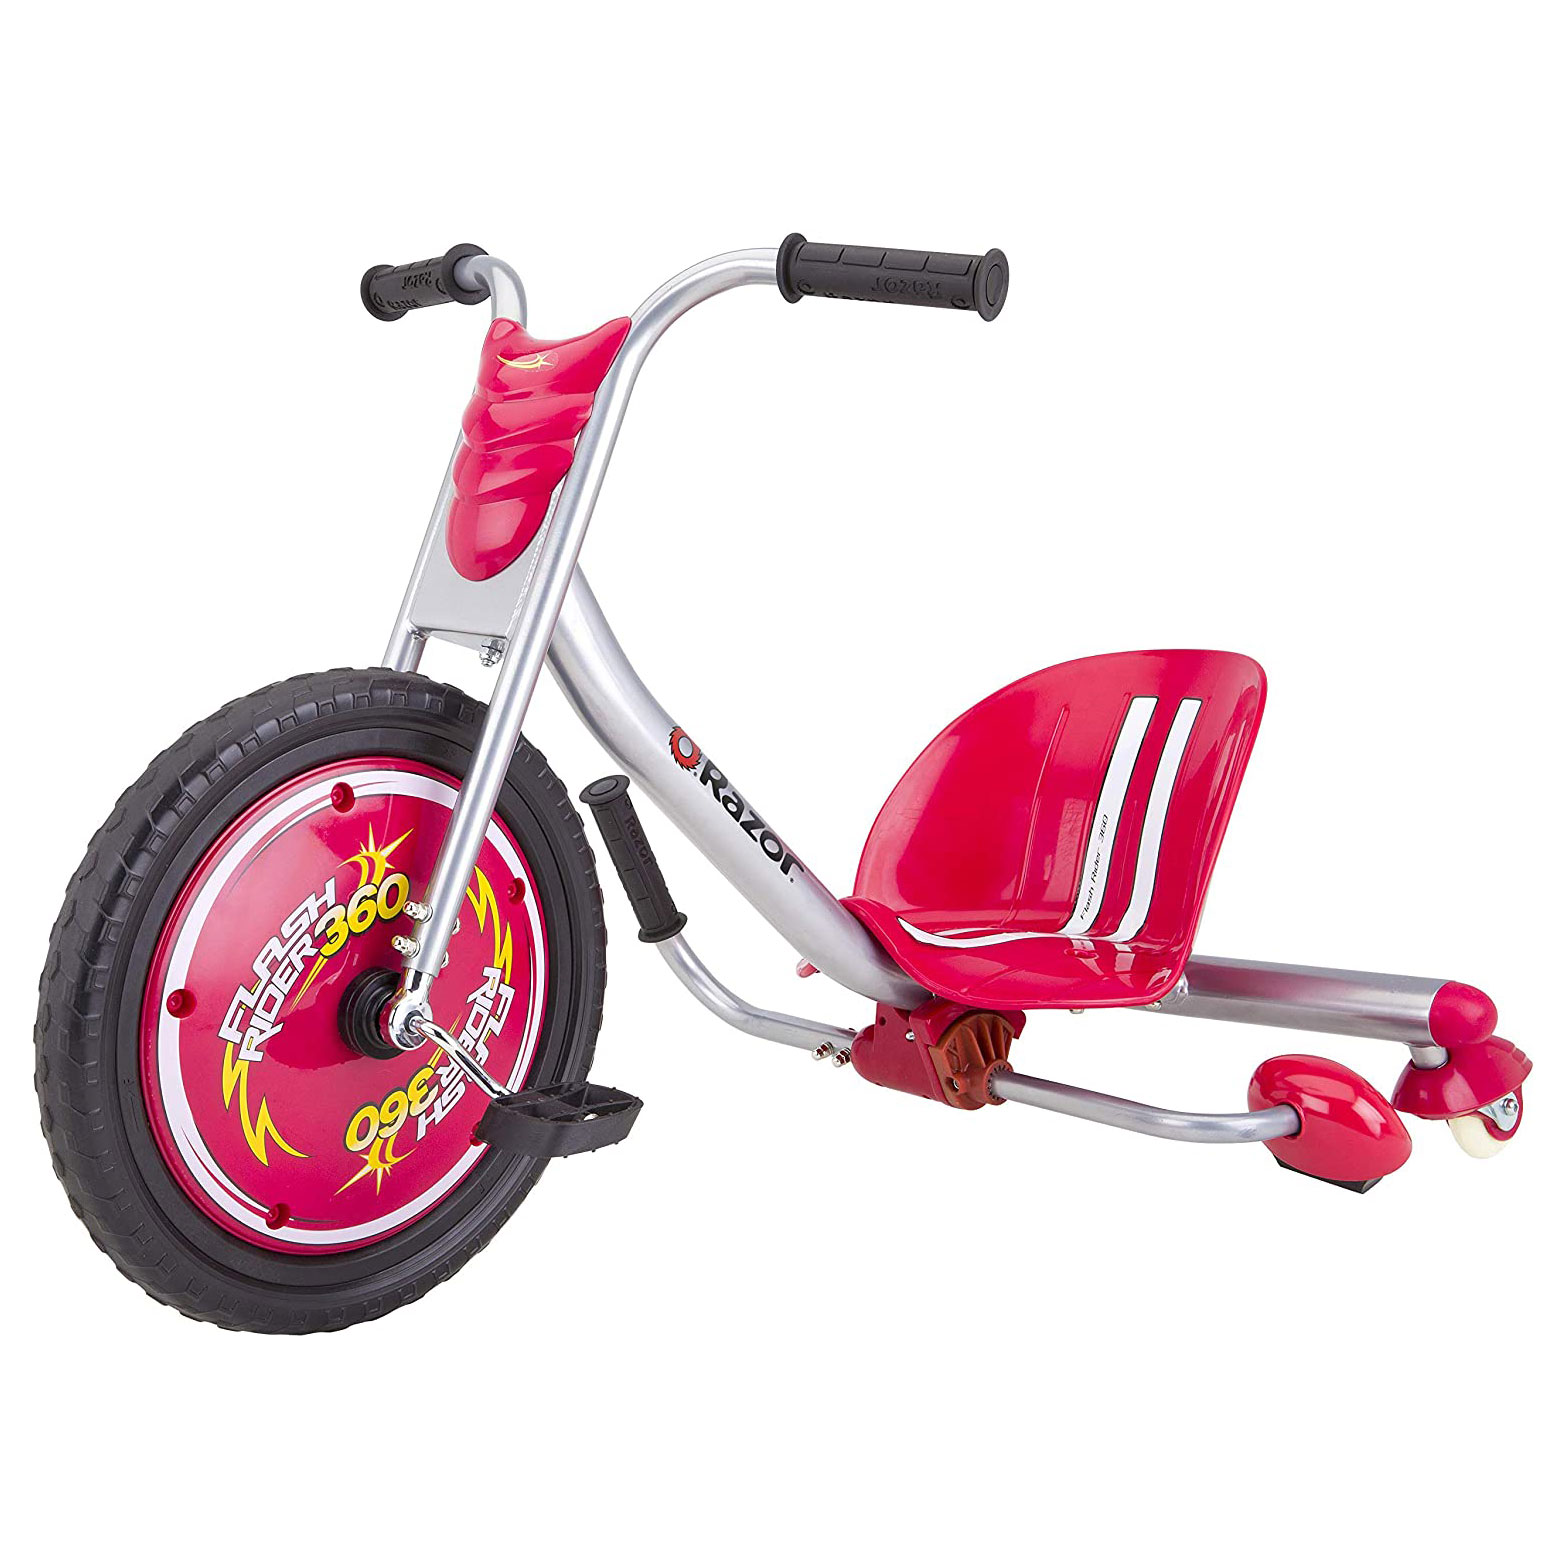 Razor FlashRider 360 Tricycle with Sparks - Red, 16" Front Wheel, Ride-On Trike Toy for Kids Ages 6+ - image 1 of 6